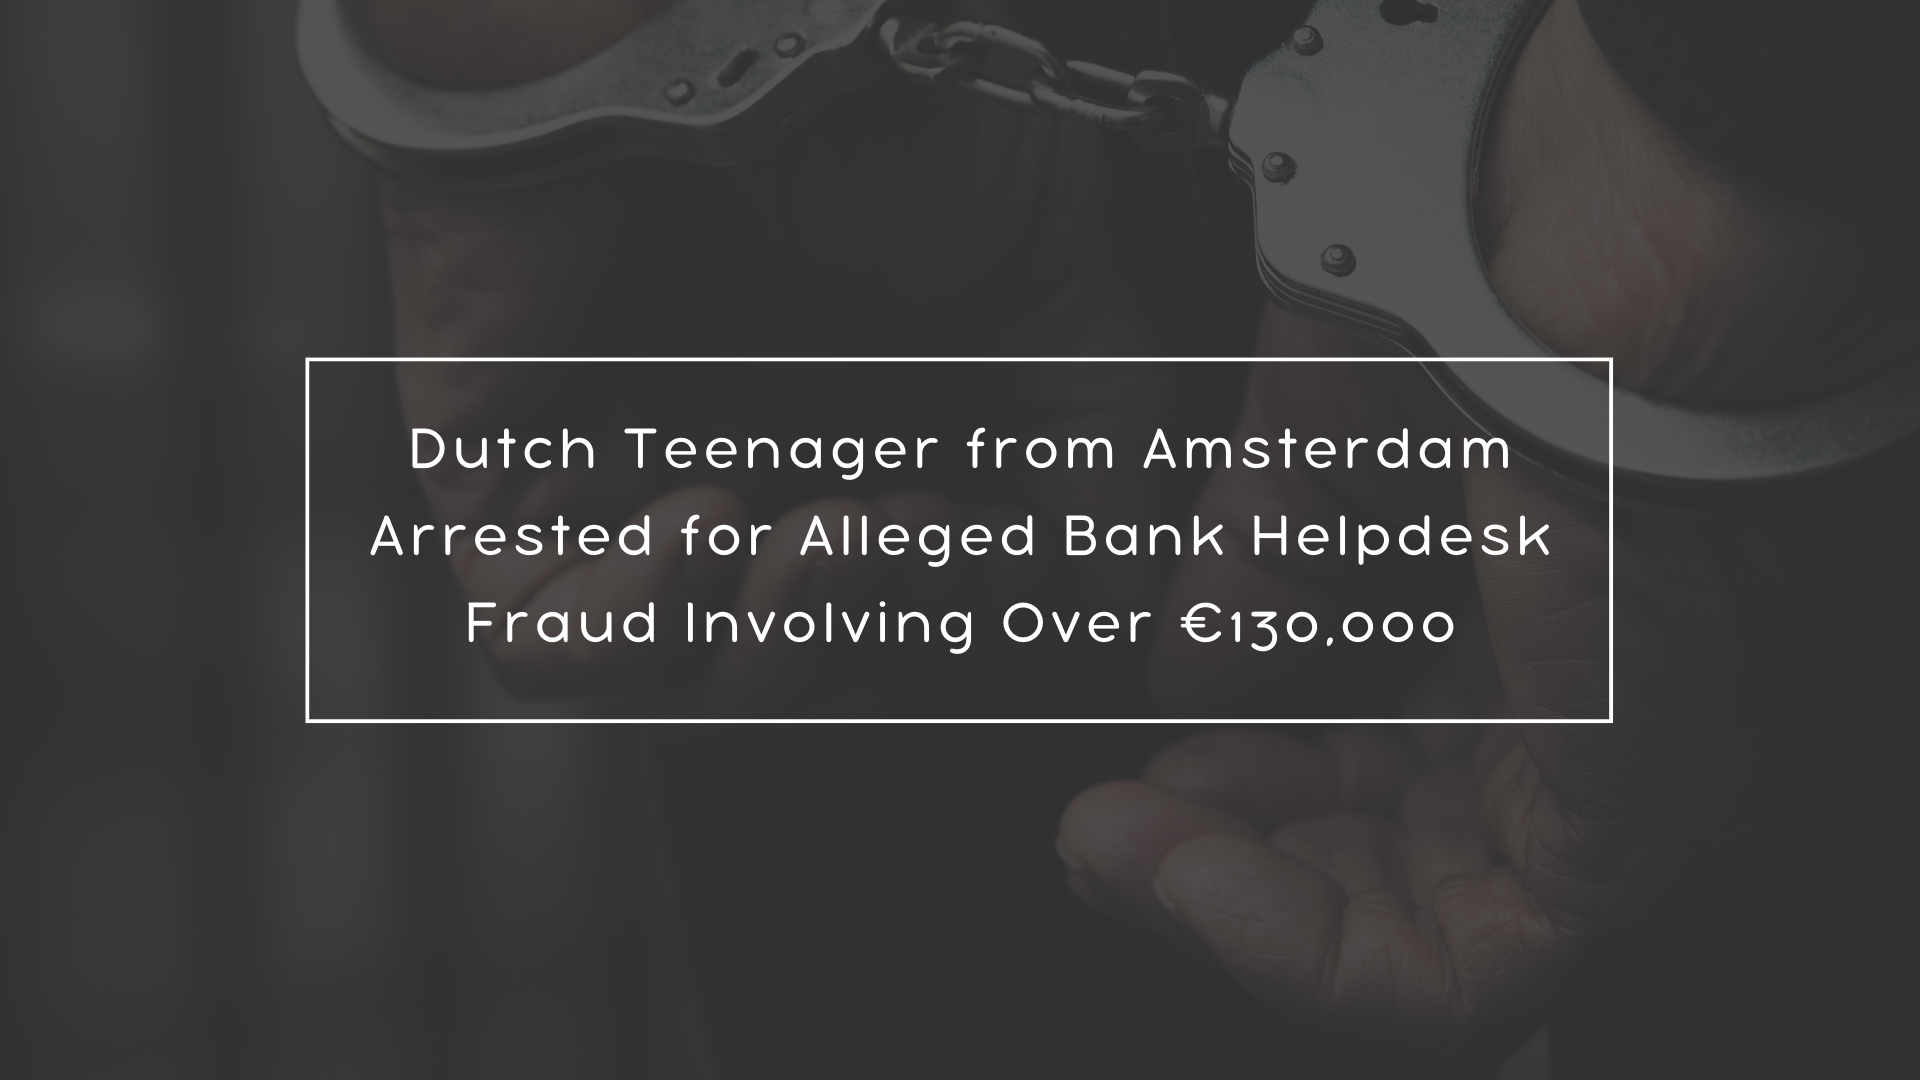 Dutch Teenager from Amsterdam Arrested for Alleged Bank Helpdesk Fraud Involving Over €130,000